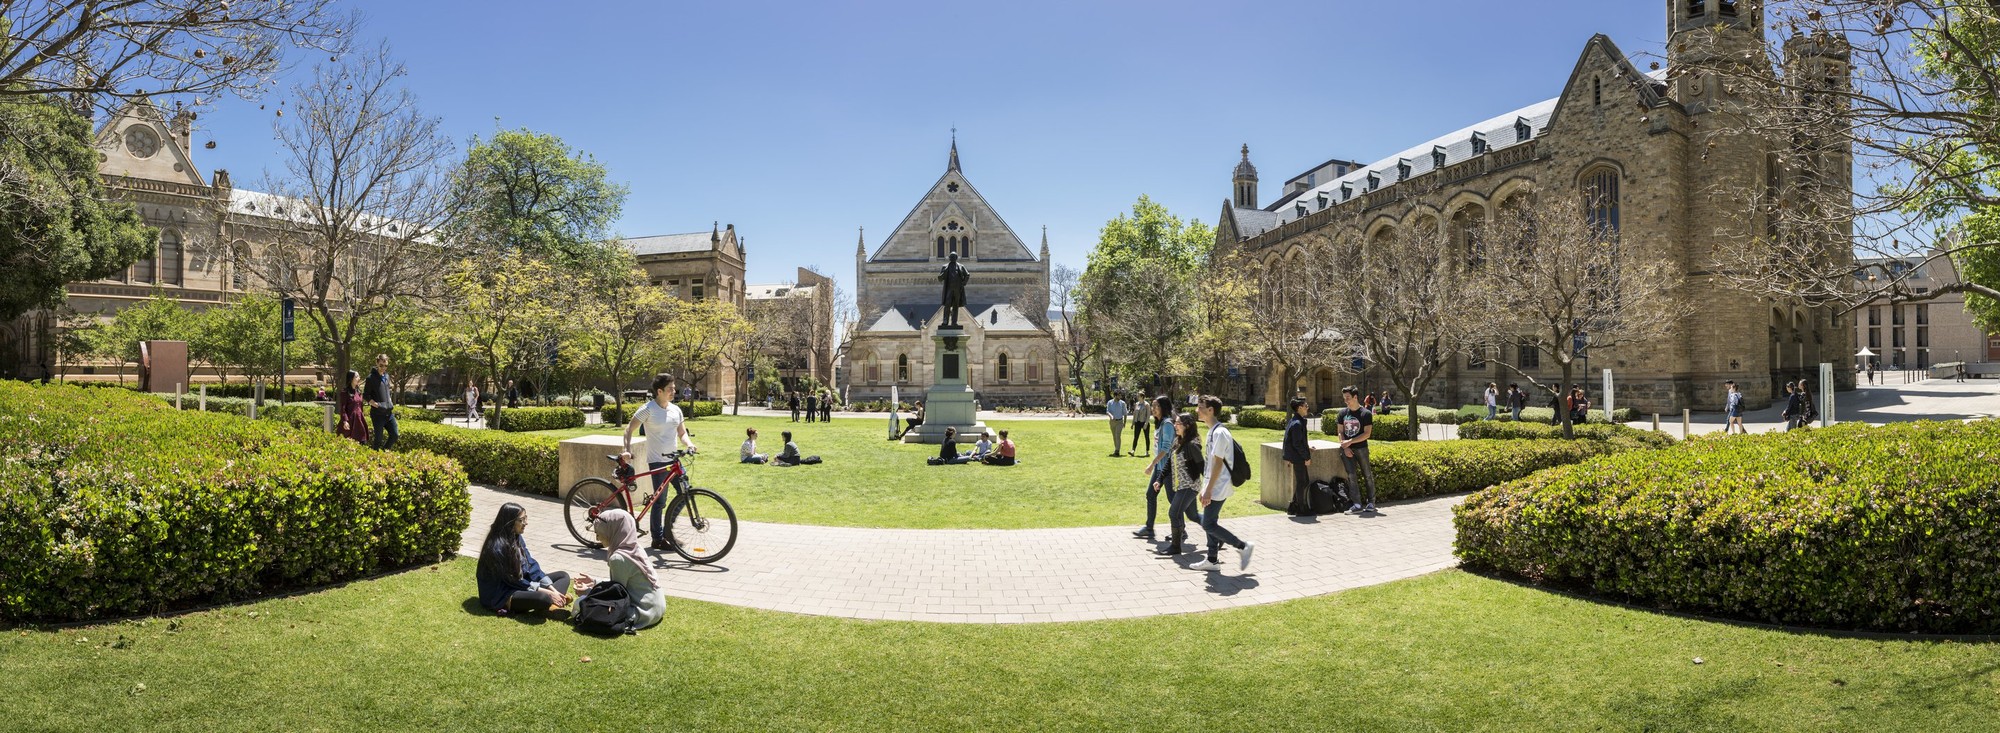 Campus and quad view with students of the University of Adelaide